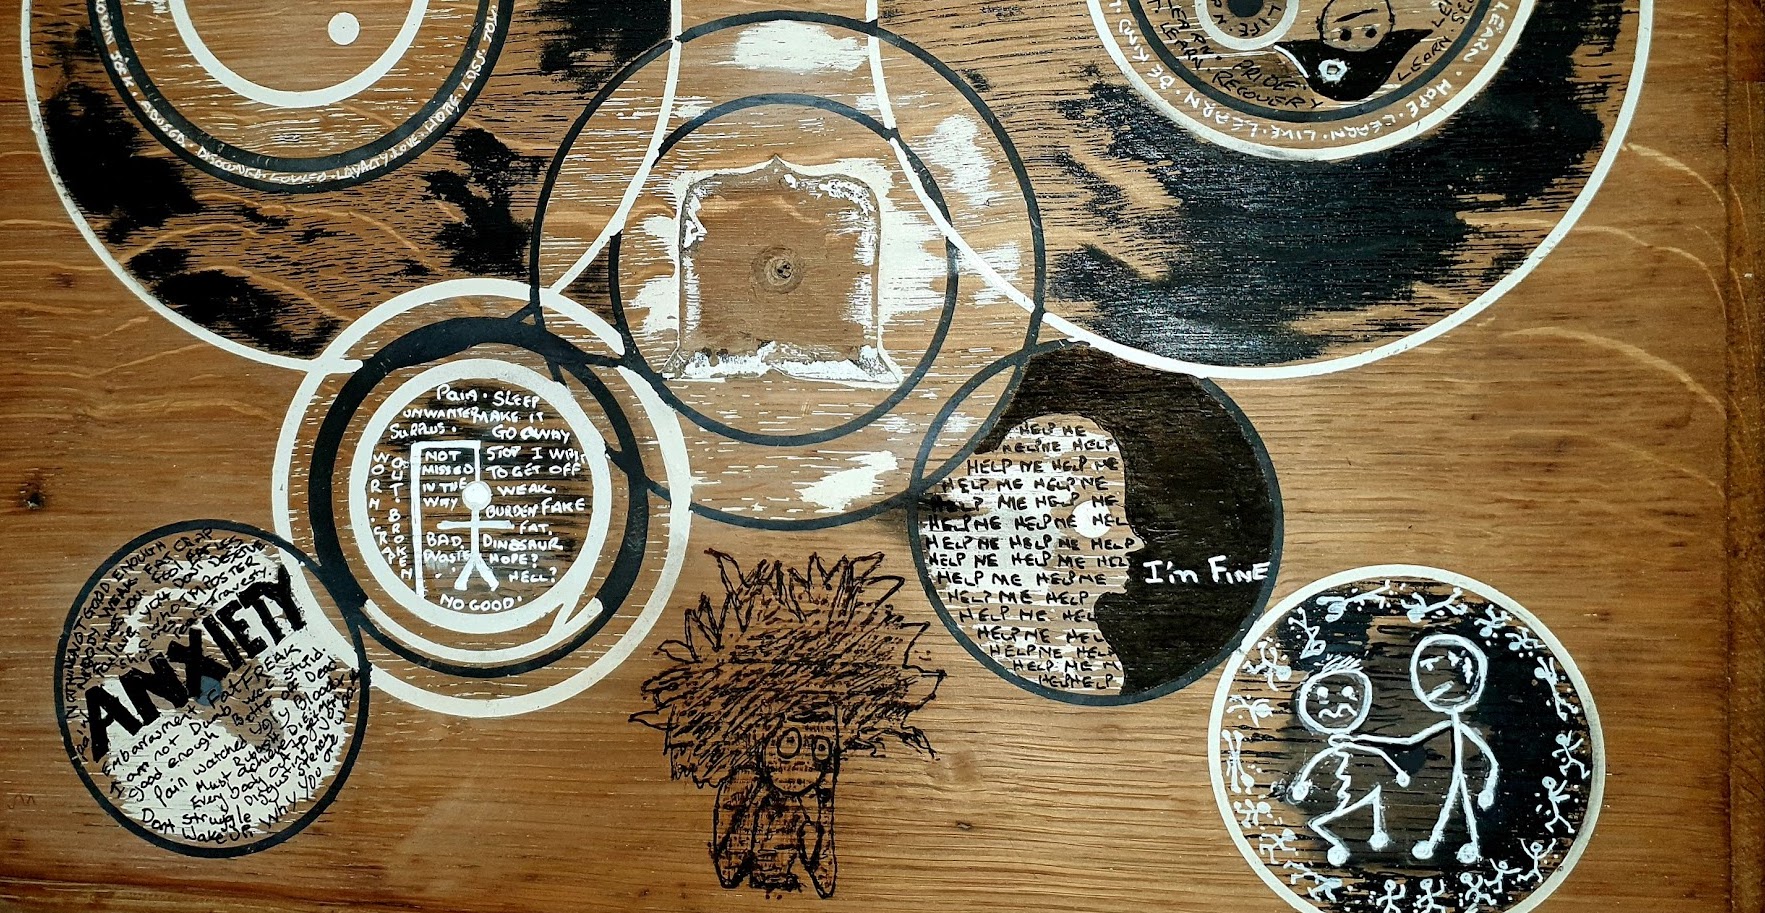 A piece of artwork on wood, created by a participant